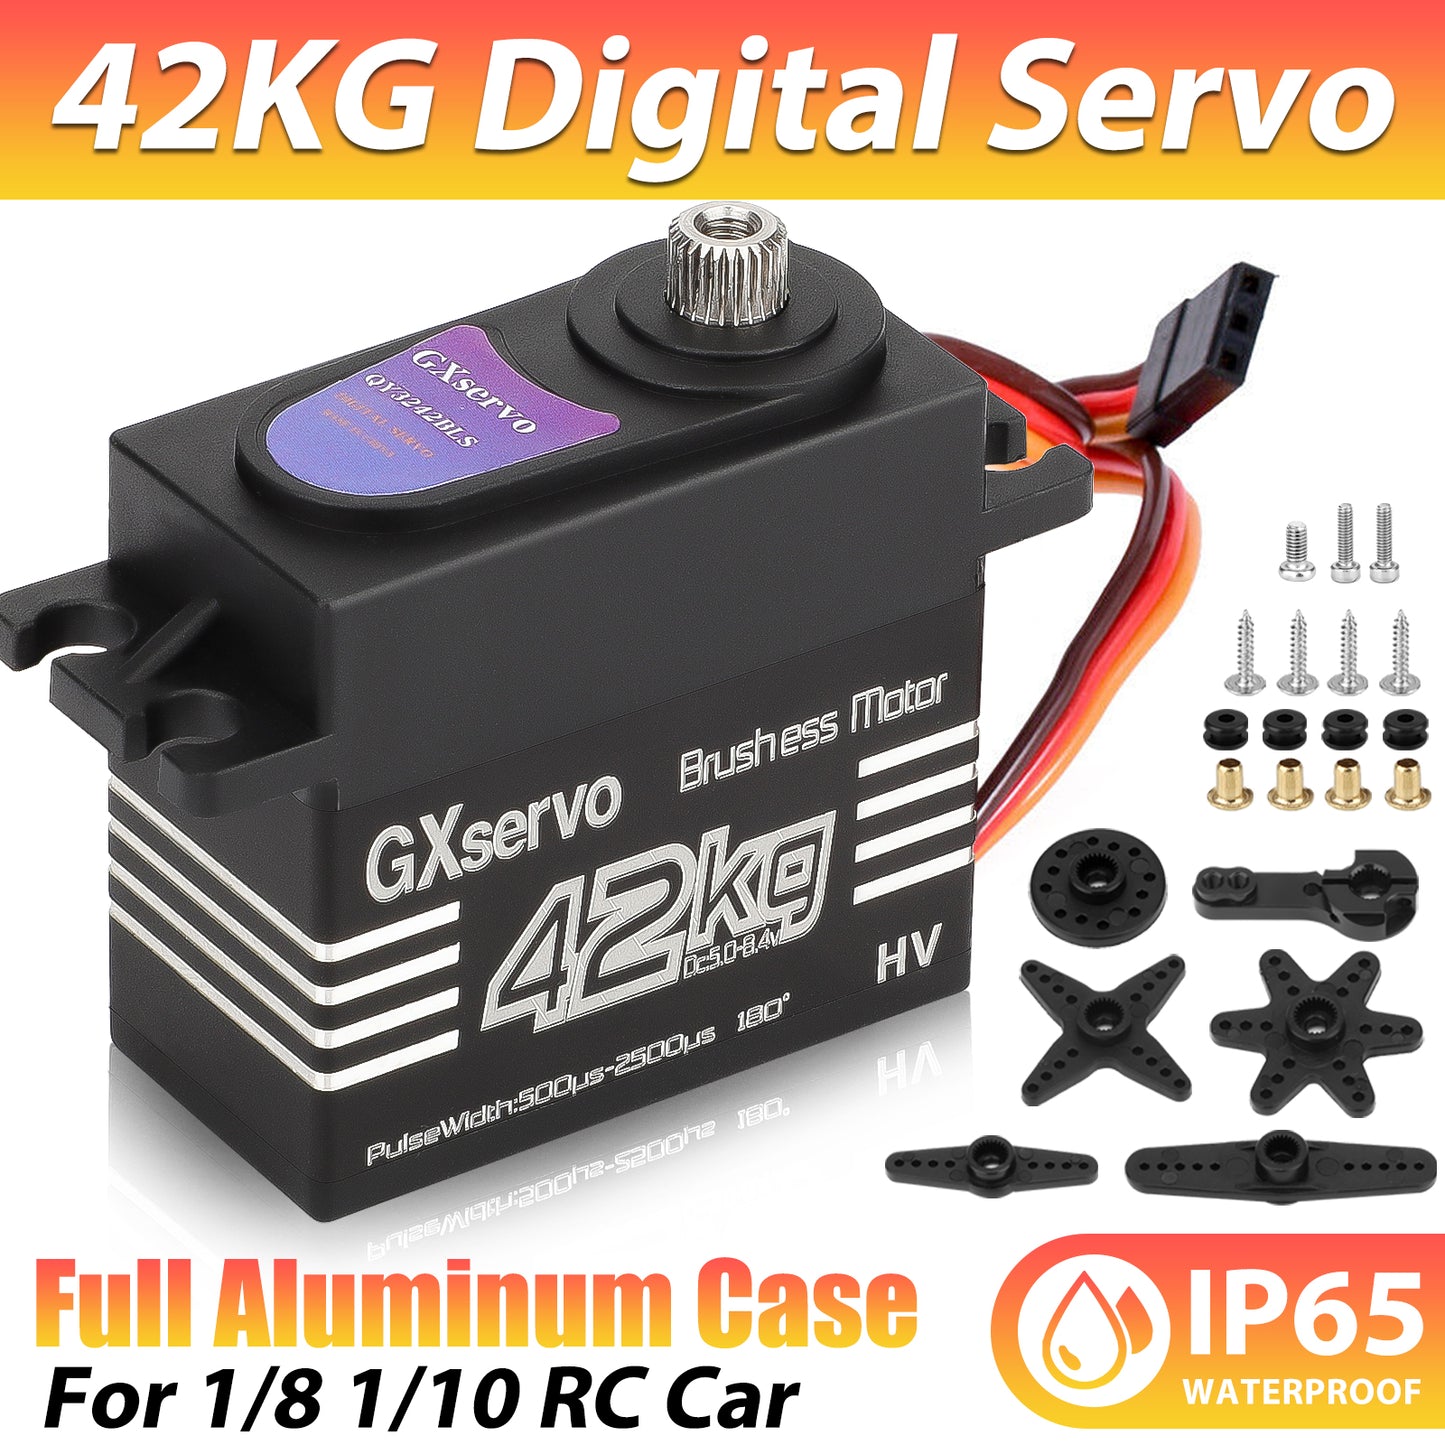 High Torque Waterproof RC Digital Servo - 42kg/cm,Brushless Motor, Precise Control, for 1/8, 1/10 trucks, RC cars, boats, and more